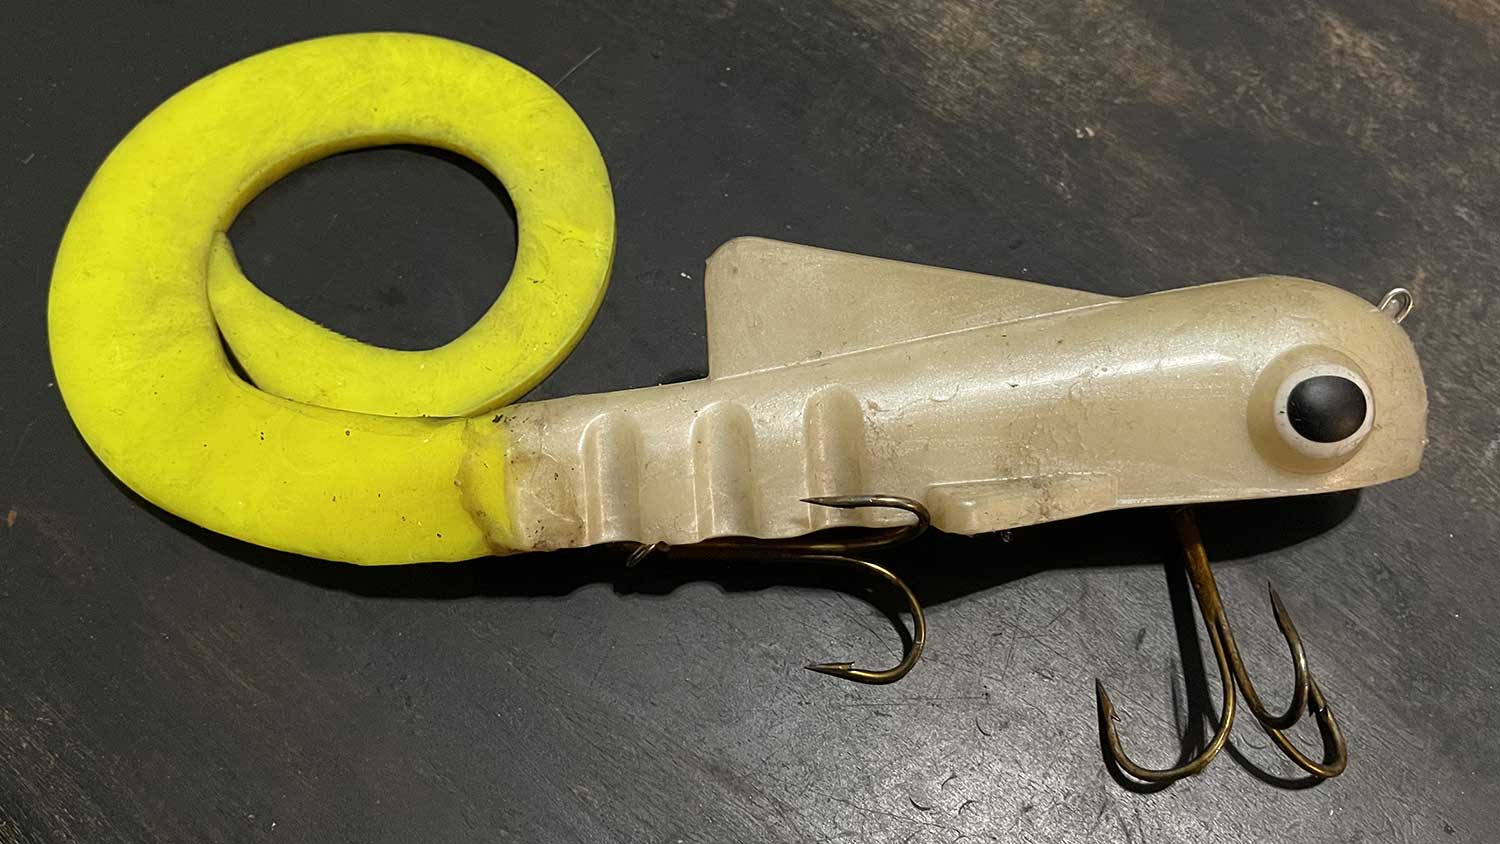 A small hooked lure